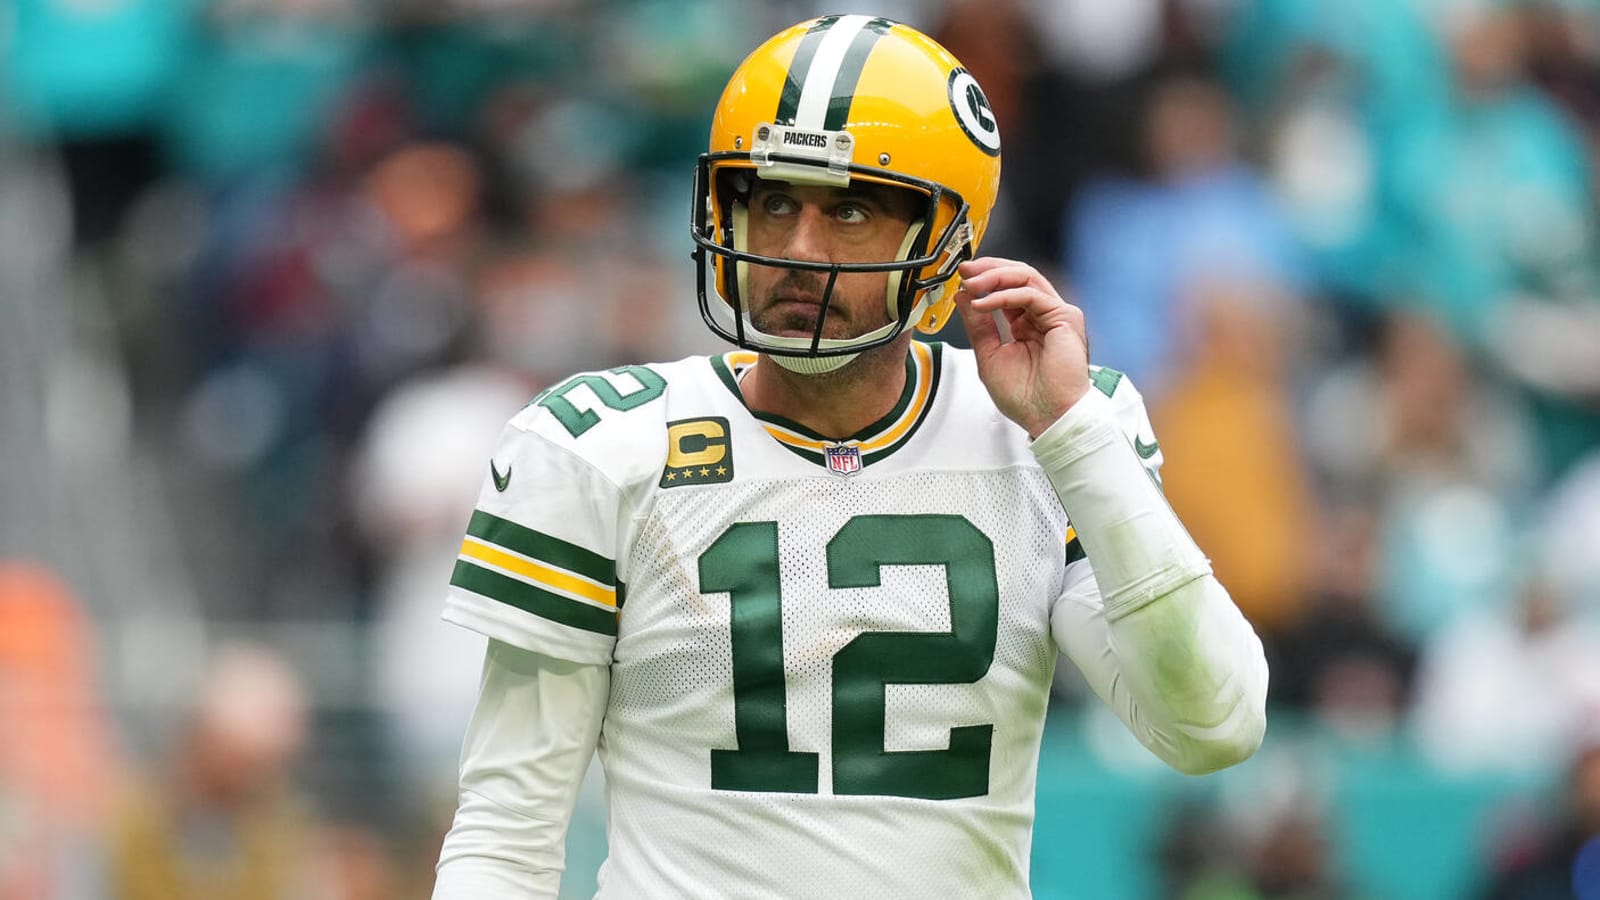 Are Jets setting themselves up for failure with Rodgers?